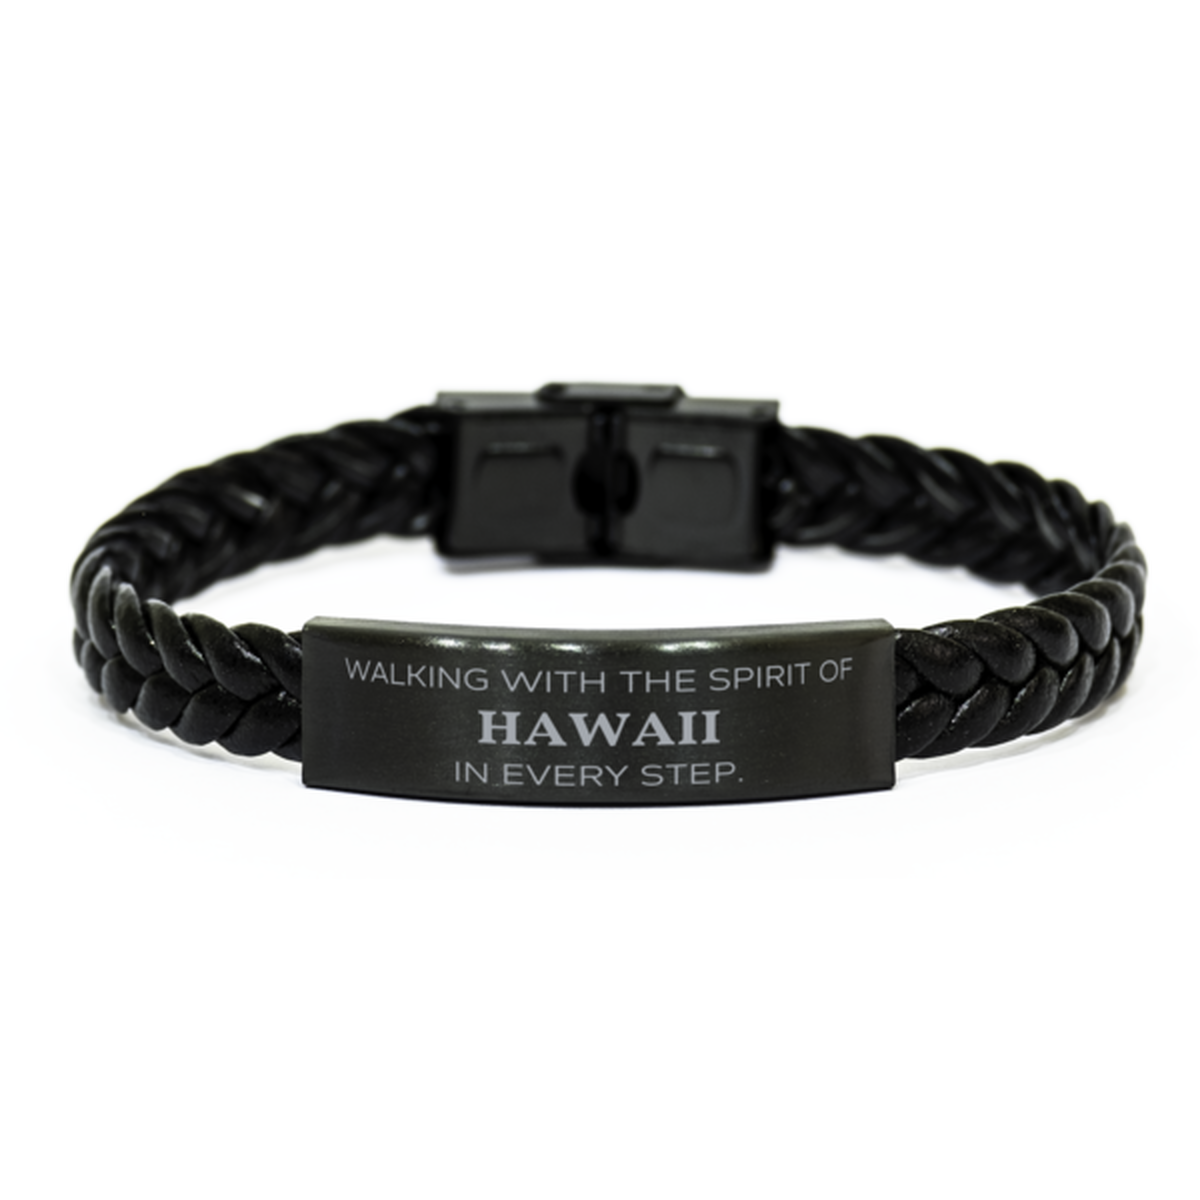 Hawaii Gifts, Walking with the spirit, Love Hawaii Birthday Christmas Braided Leather Bracelet For Hawaii People, Men, Women, Friends